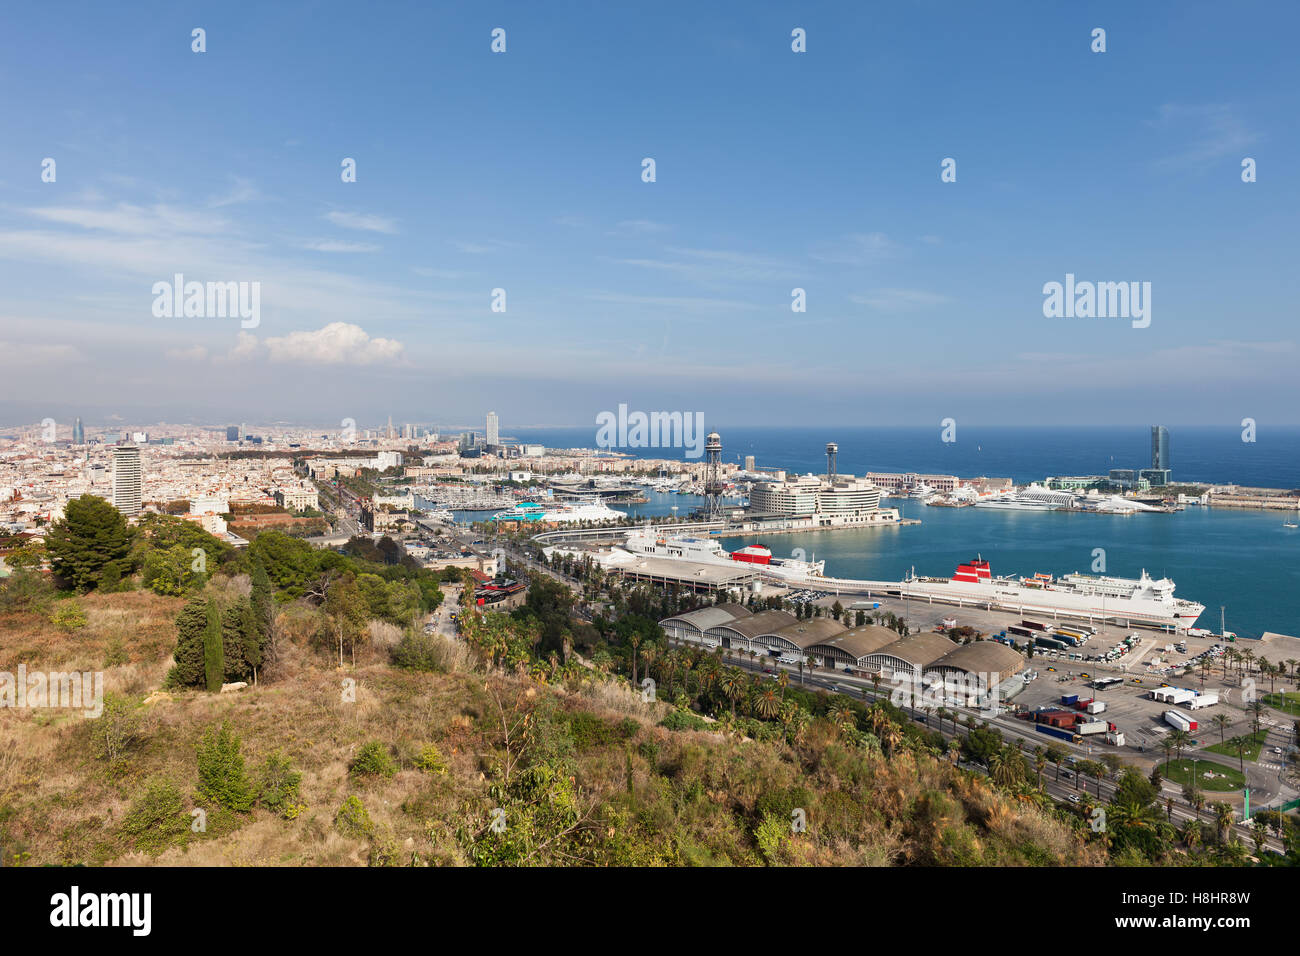 Spain, Barcelona, view over the city and port from Montjuic Hill, seaside cityscape Stock Photo